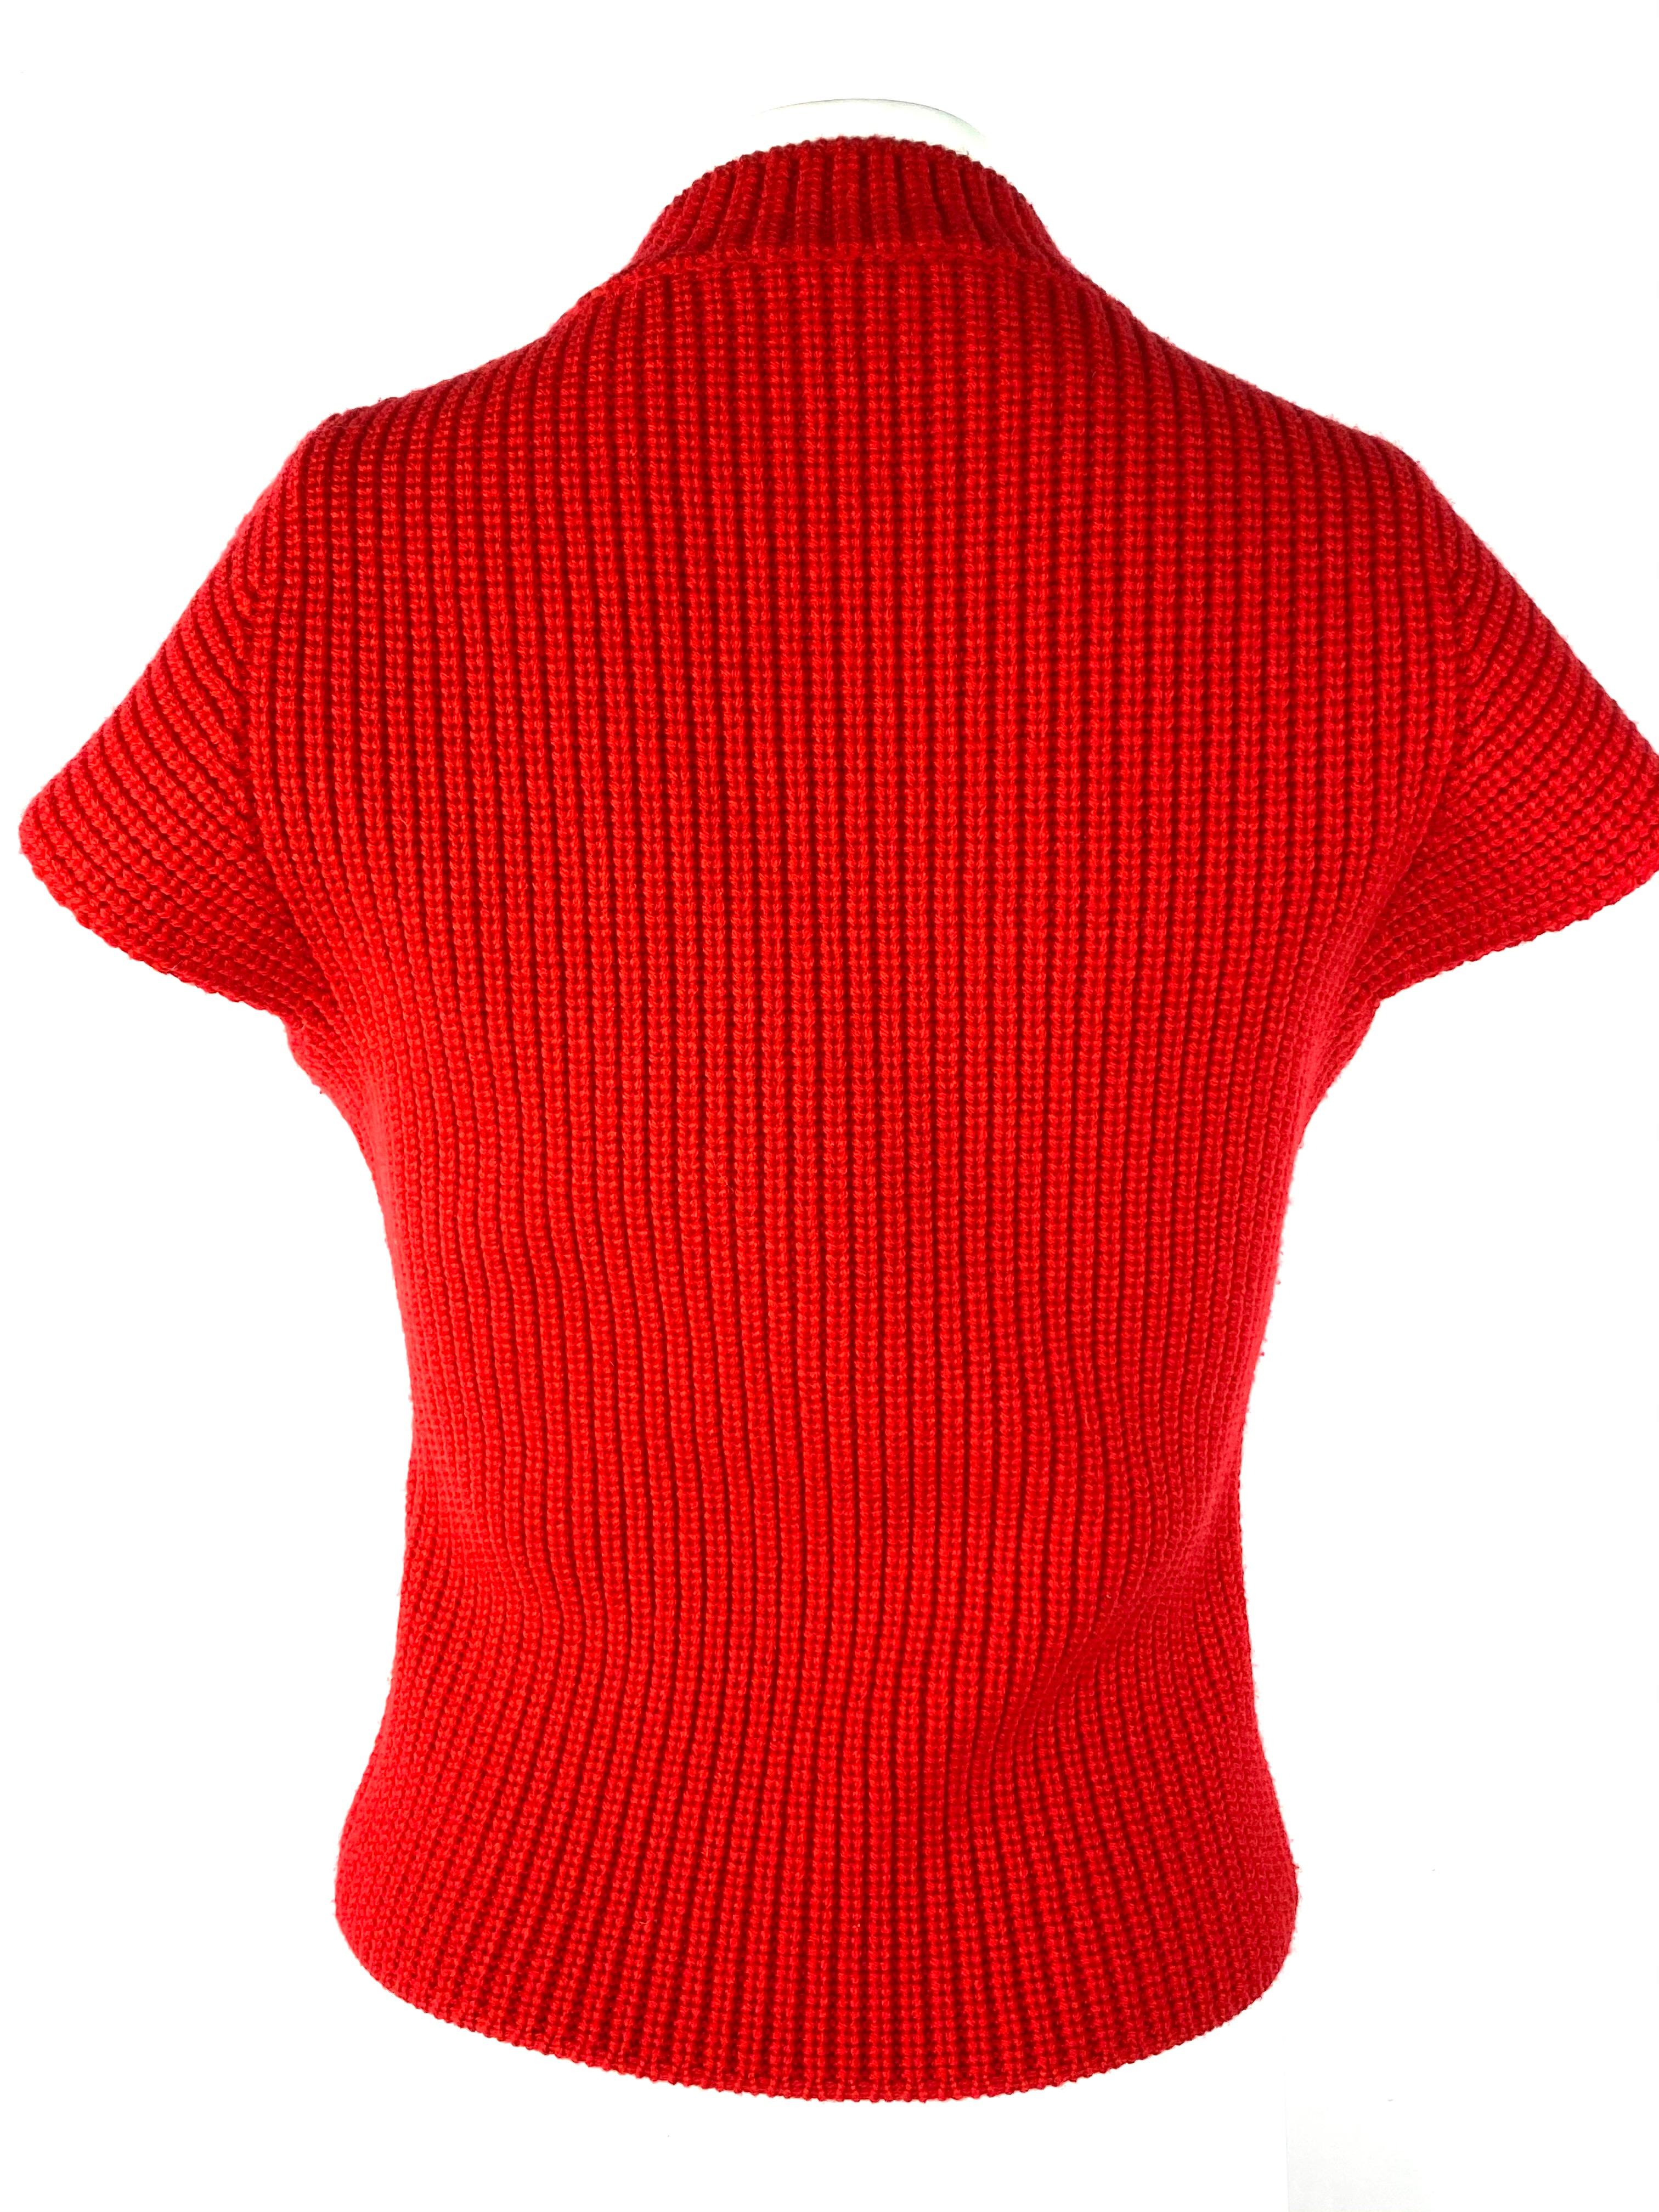 red and black sweater vest